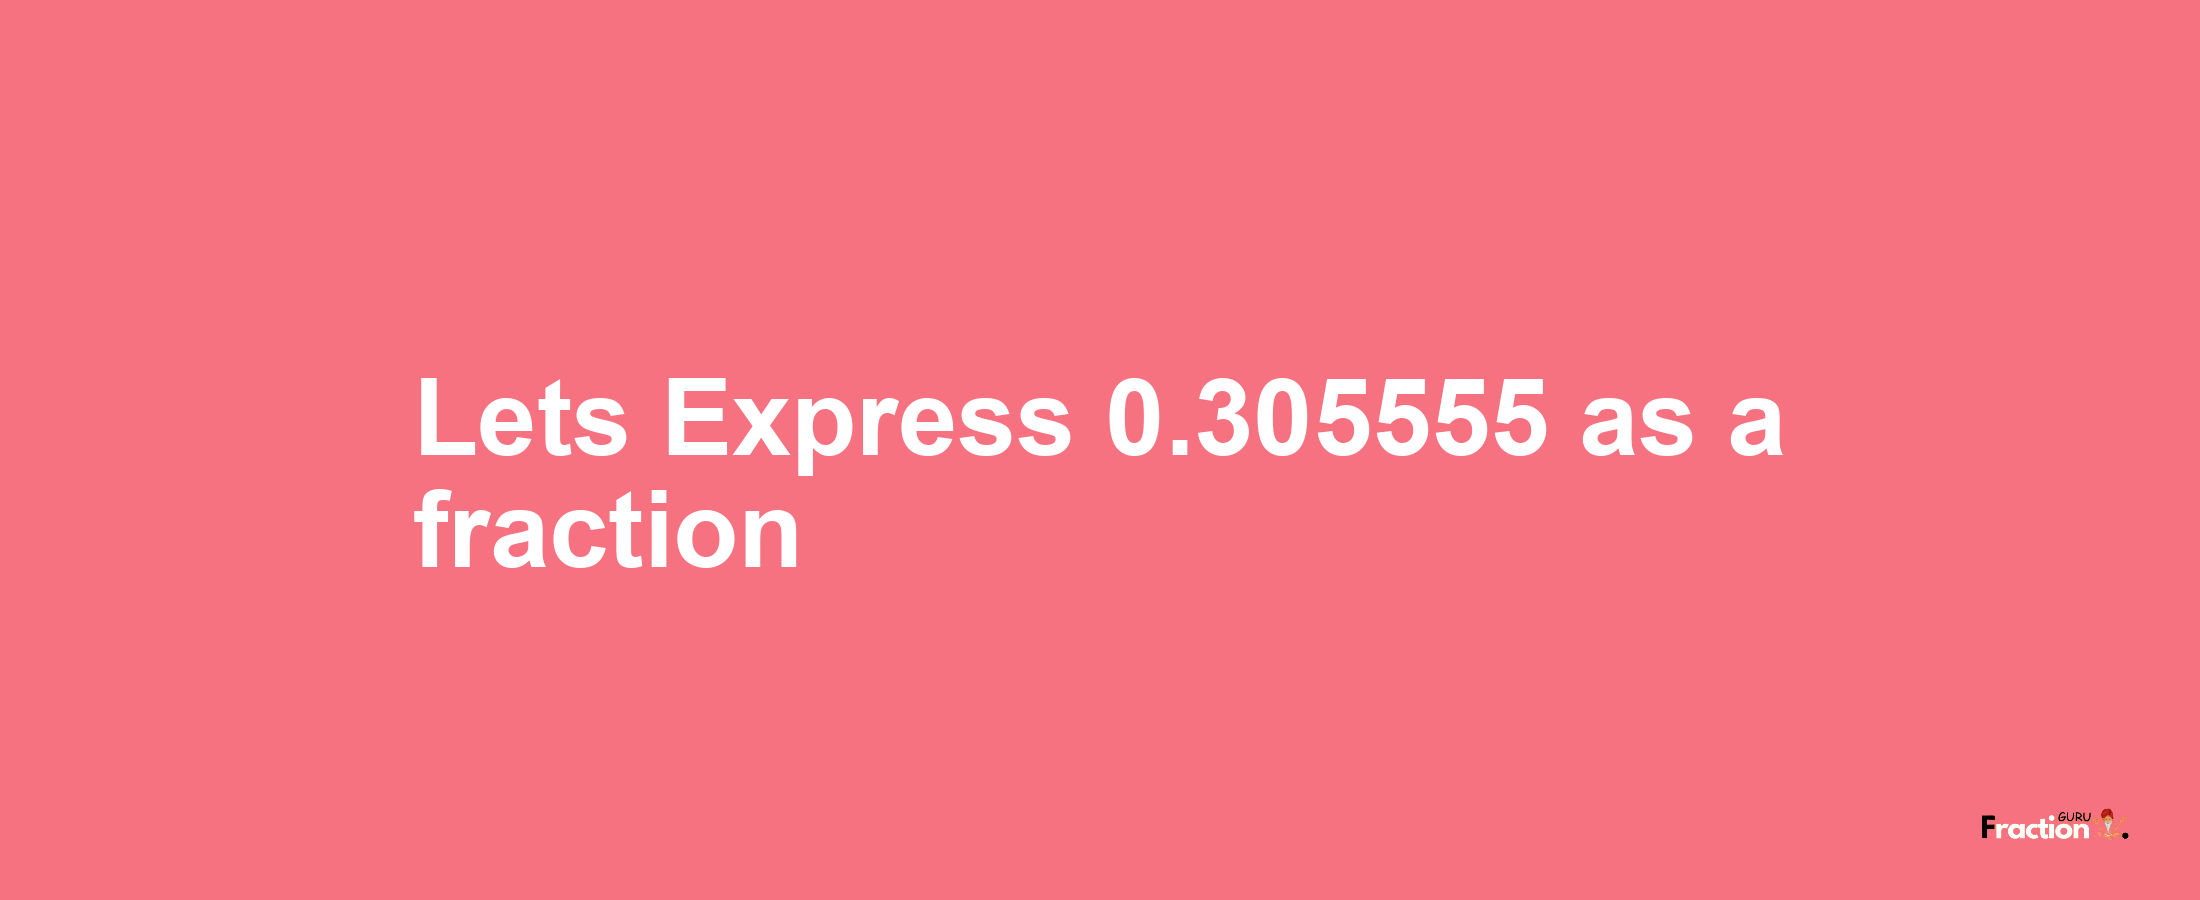 Lets Express 0.305555 as afraction